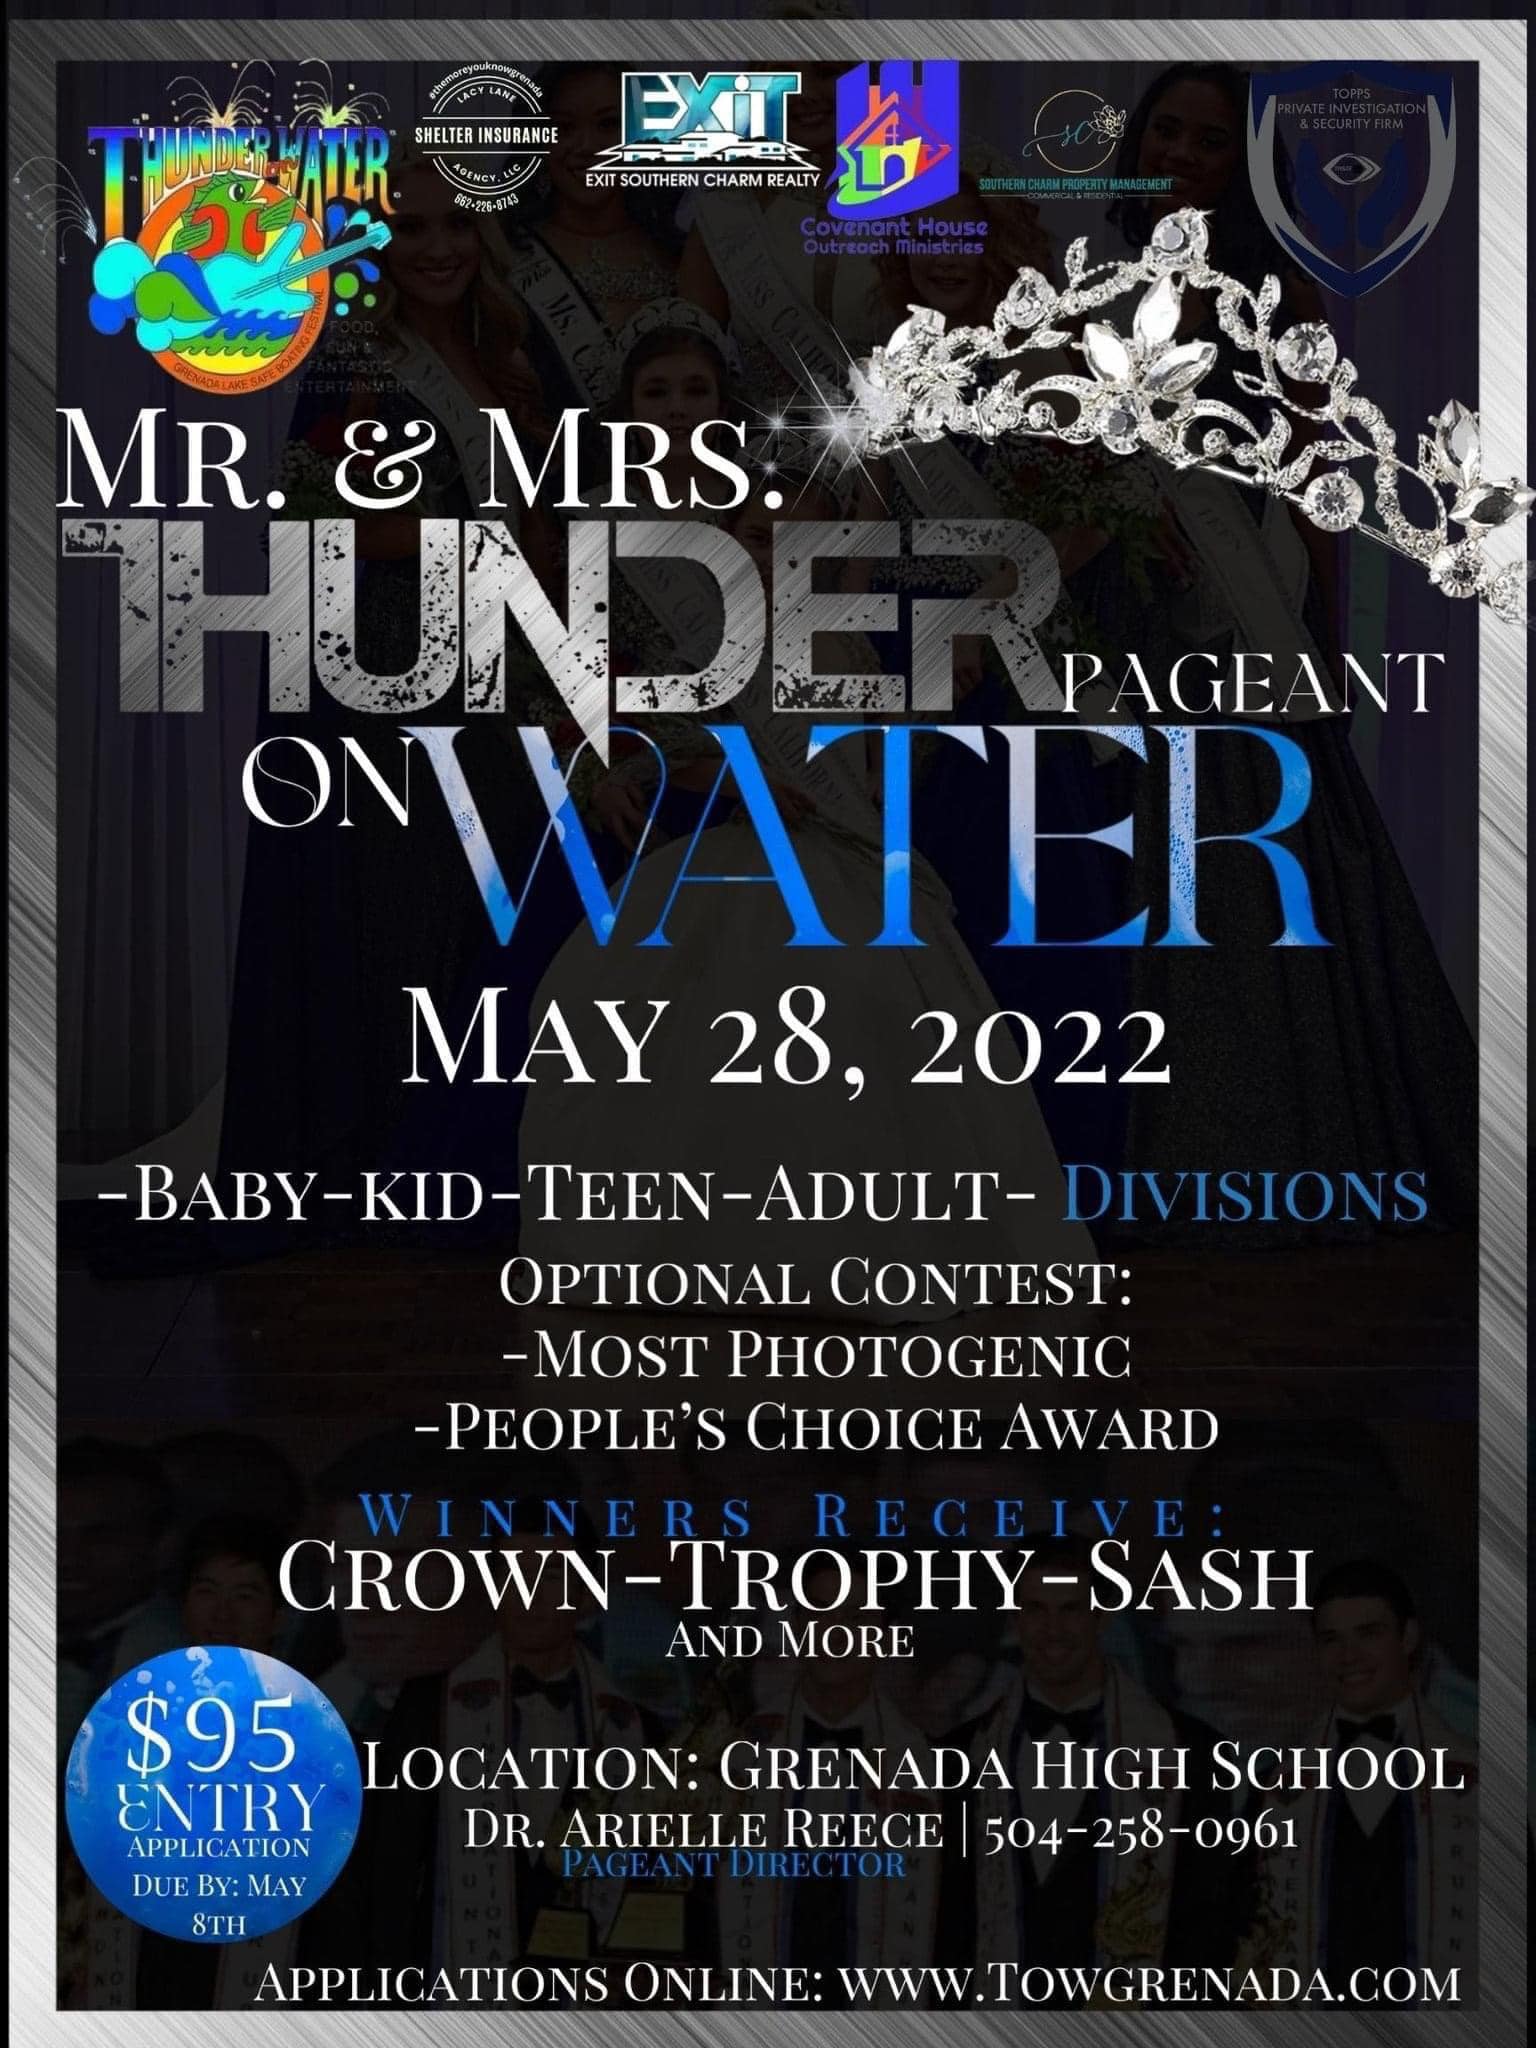 Thunder on Water Pageant